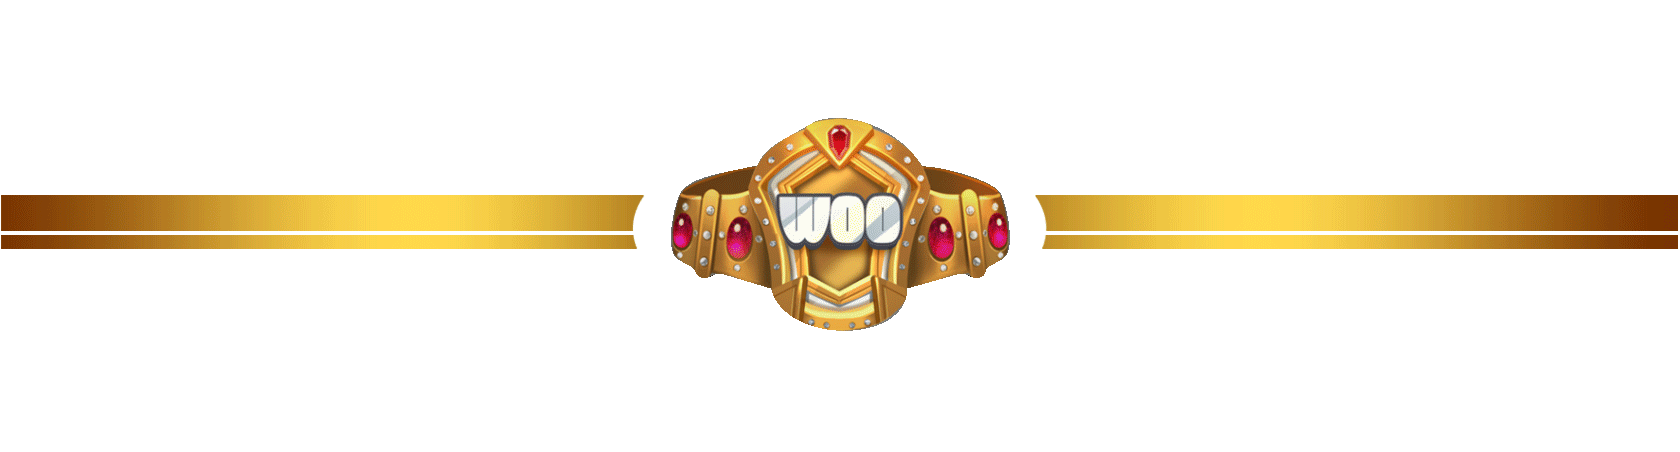 New Years Giveaway!! Win 20 RiftWatchers Packs & 50,000 $WOO